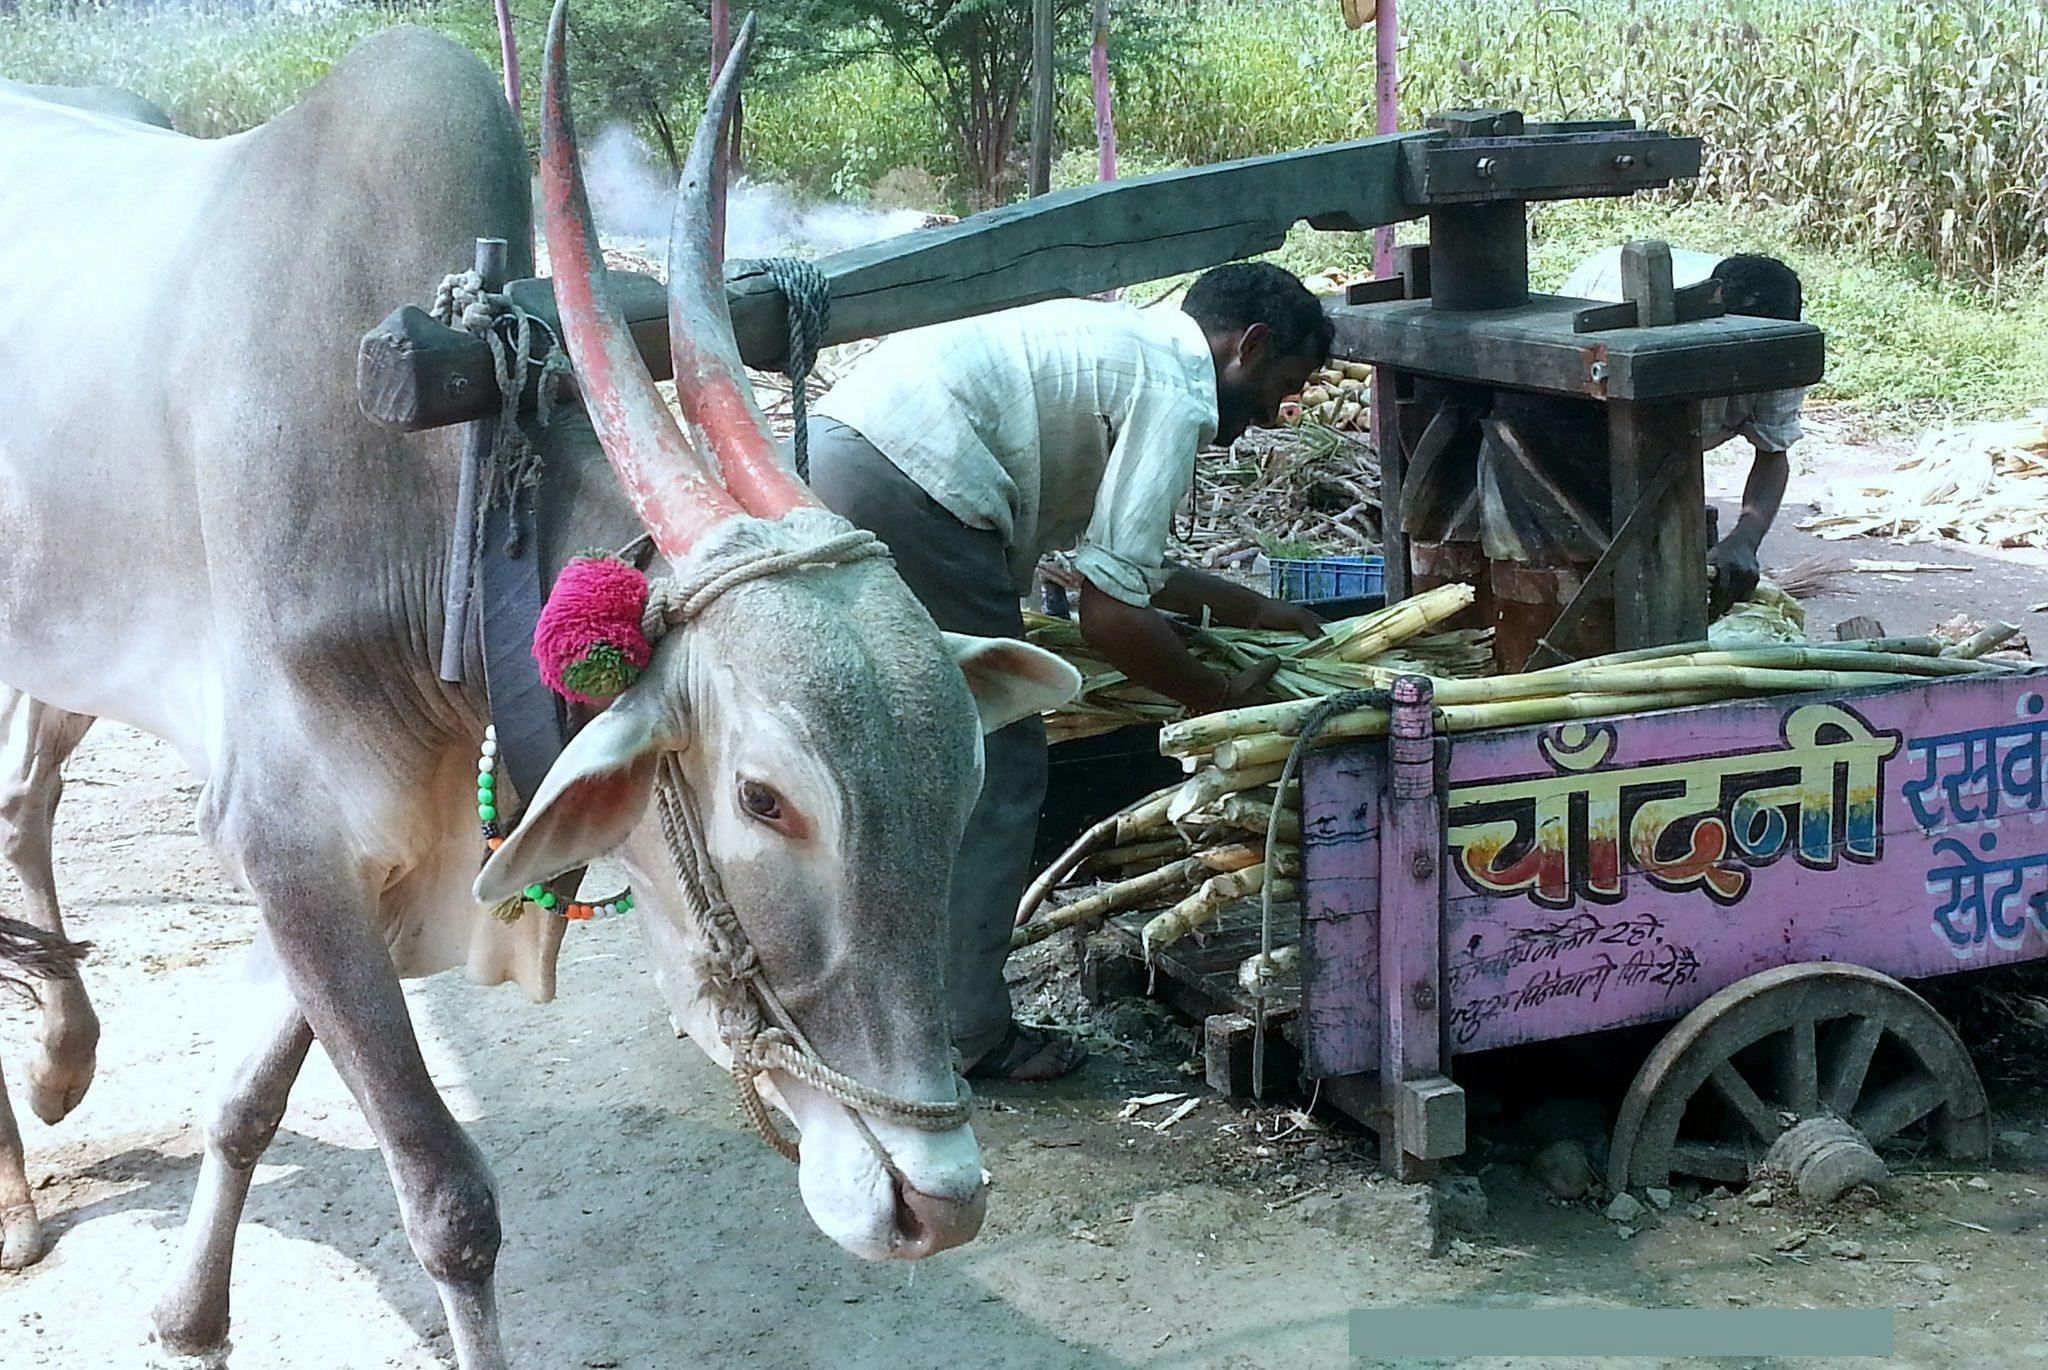 An oxen used to press sugarcane juice